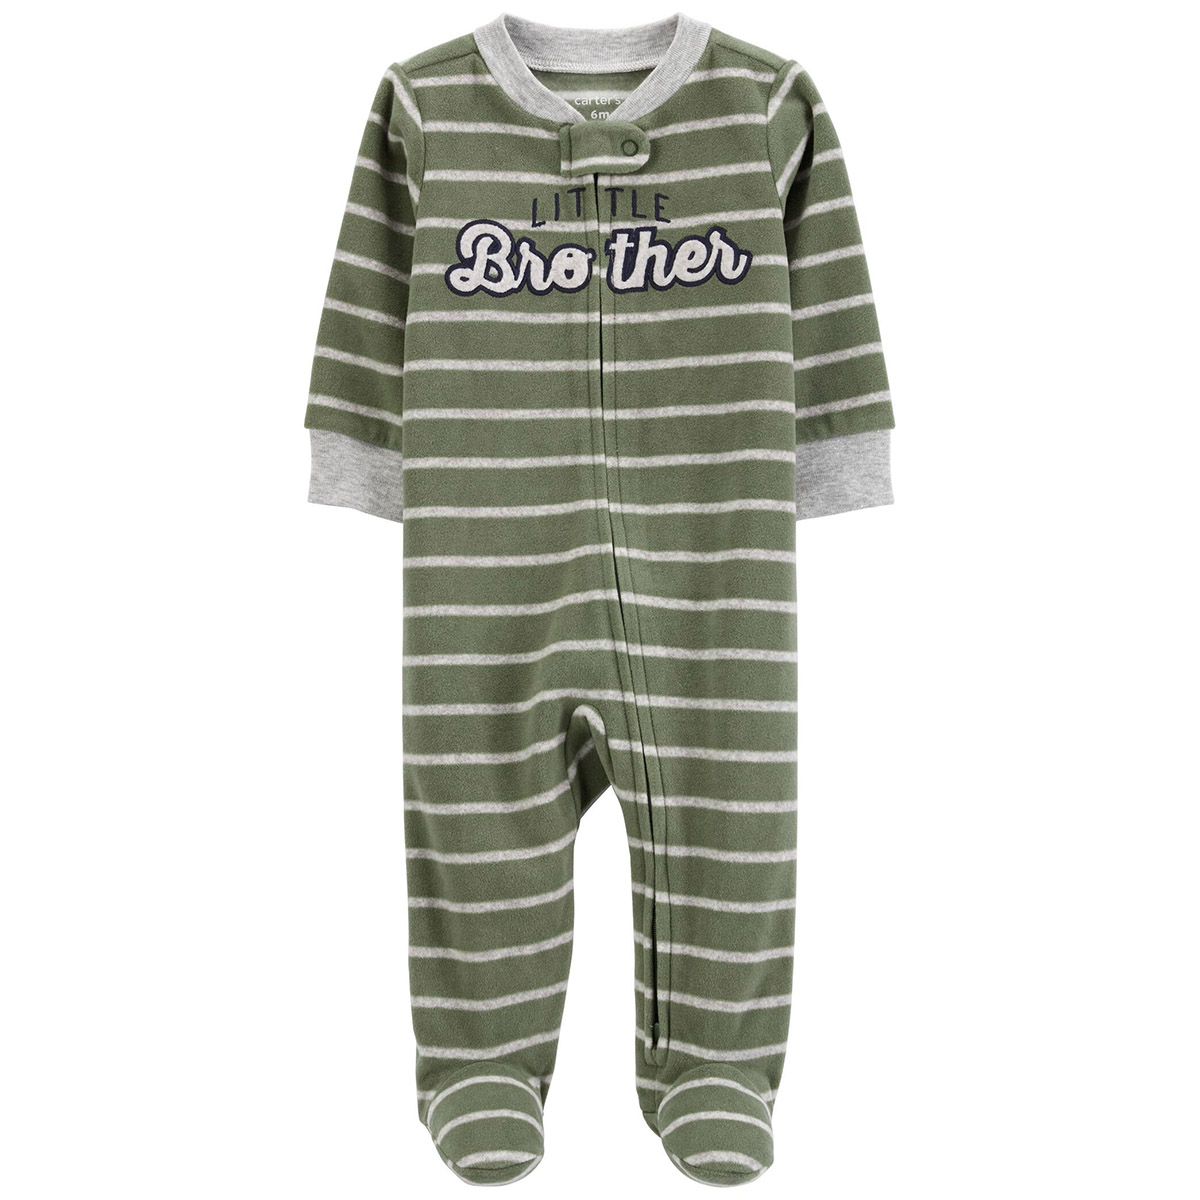 Baby Boy (NB-9M) Carters(R) Little Brother Pajamas